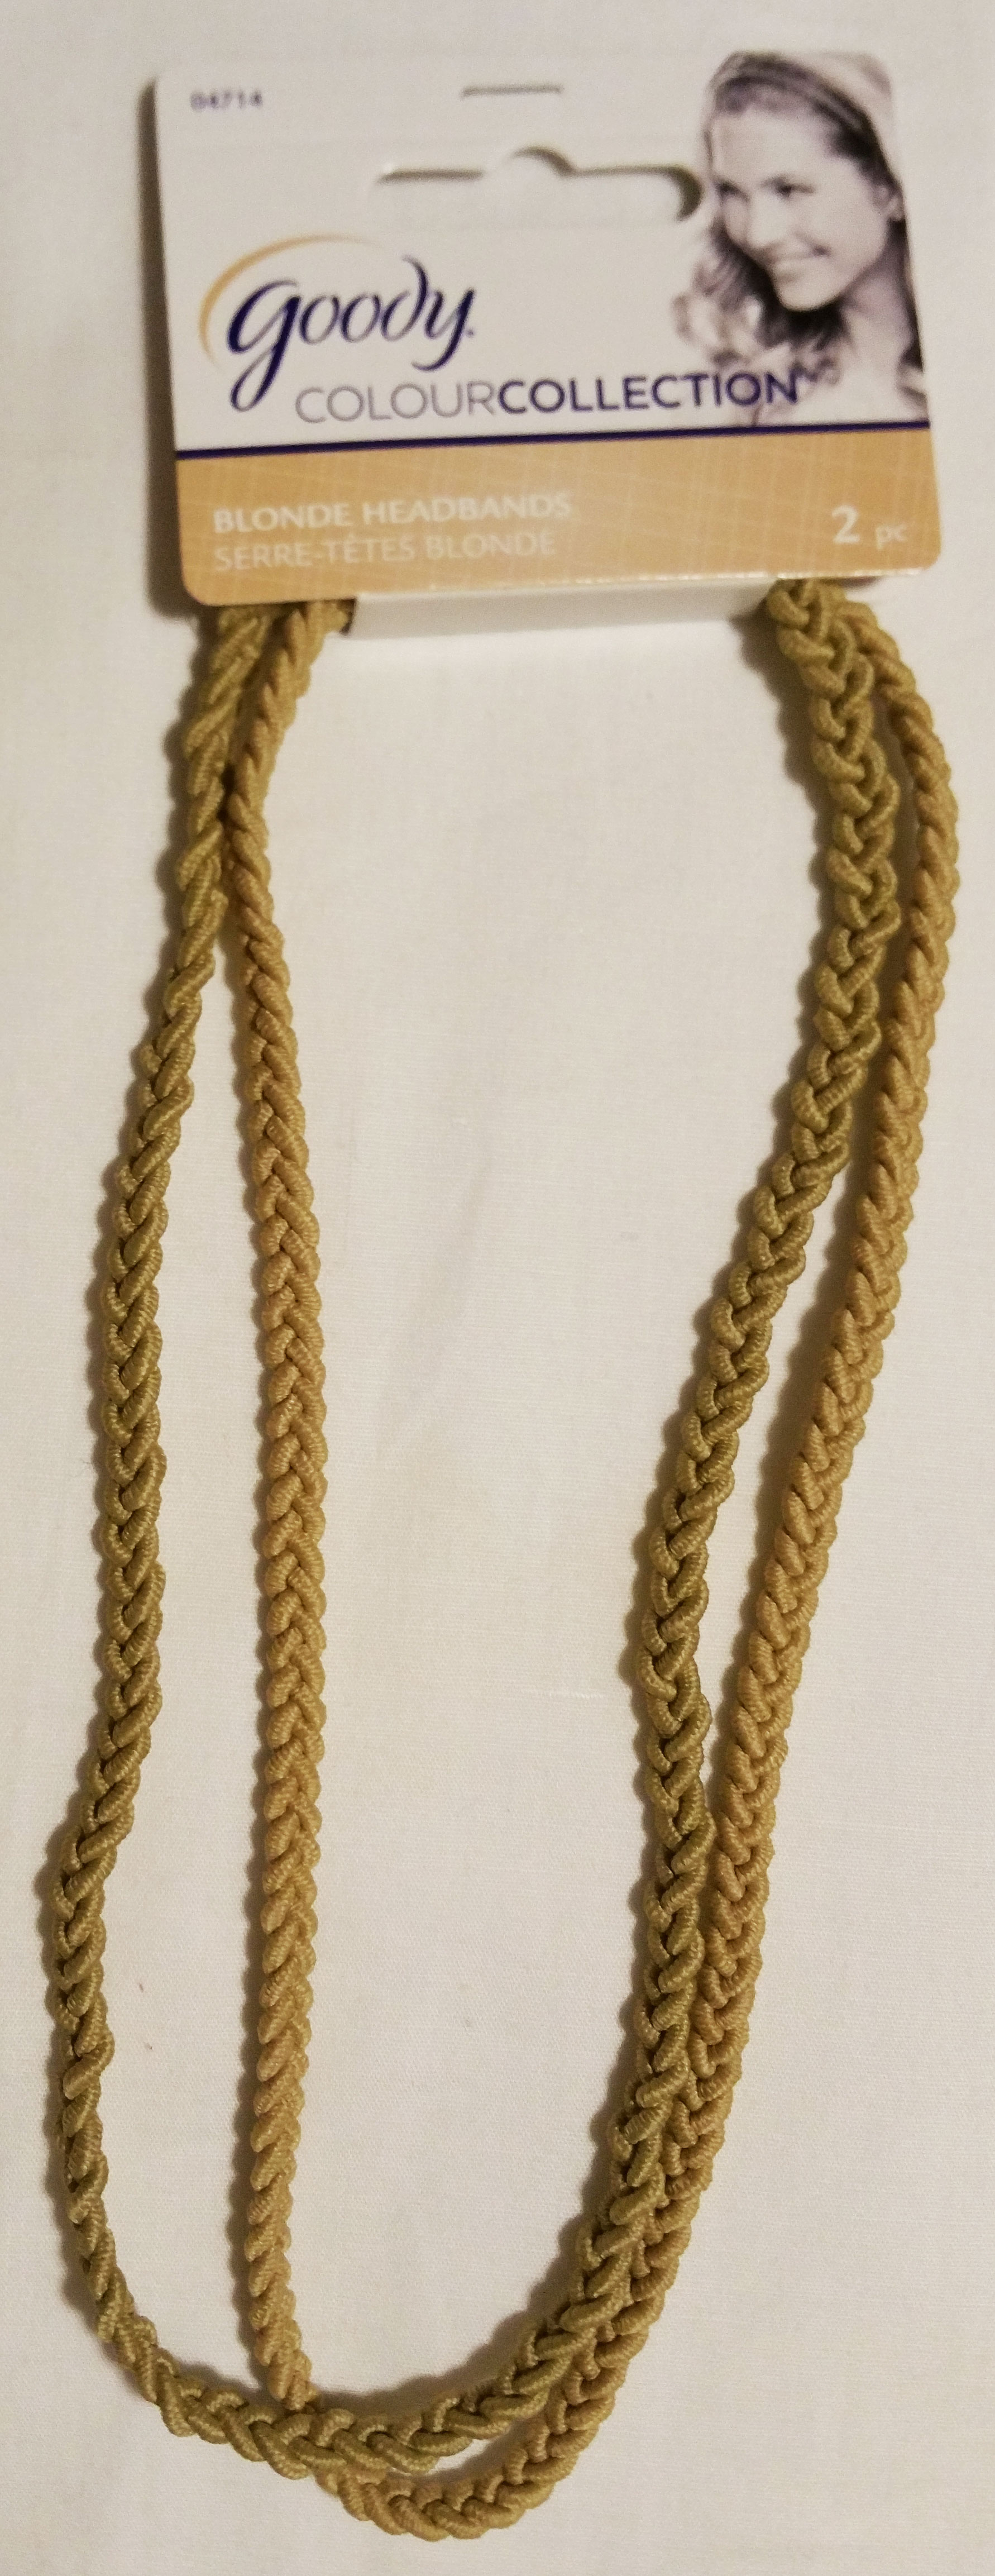 Goody Colour Collection 2 Strand Braided Headband Blonde, 2CT